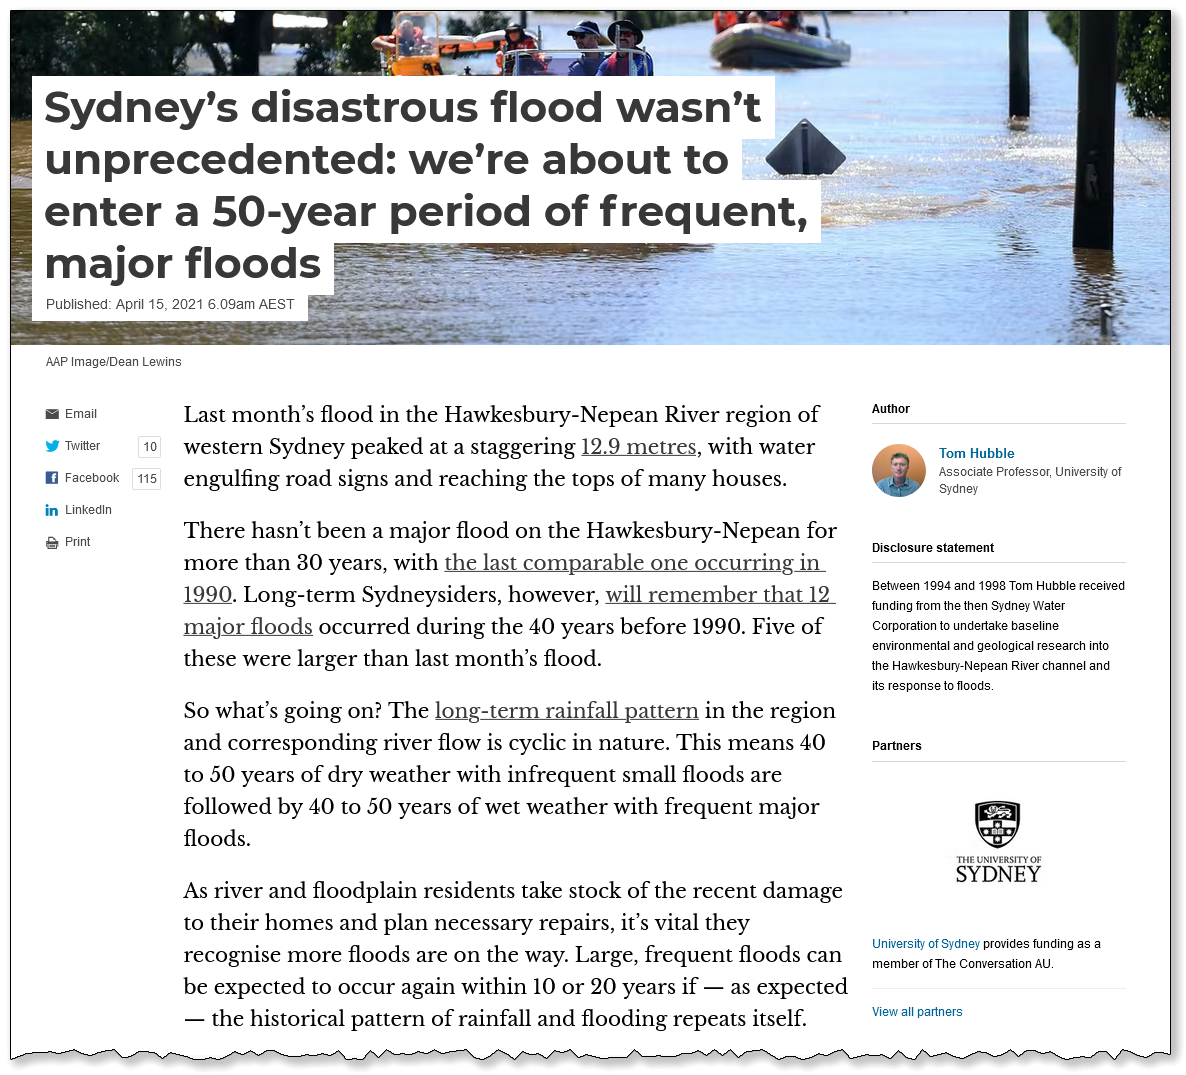 Sydney’s disastrous flood wasn’t unprecedented: we’re about to enter a 50-year period of frequent, major floods